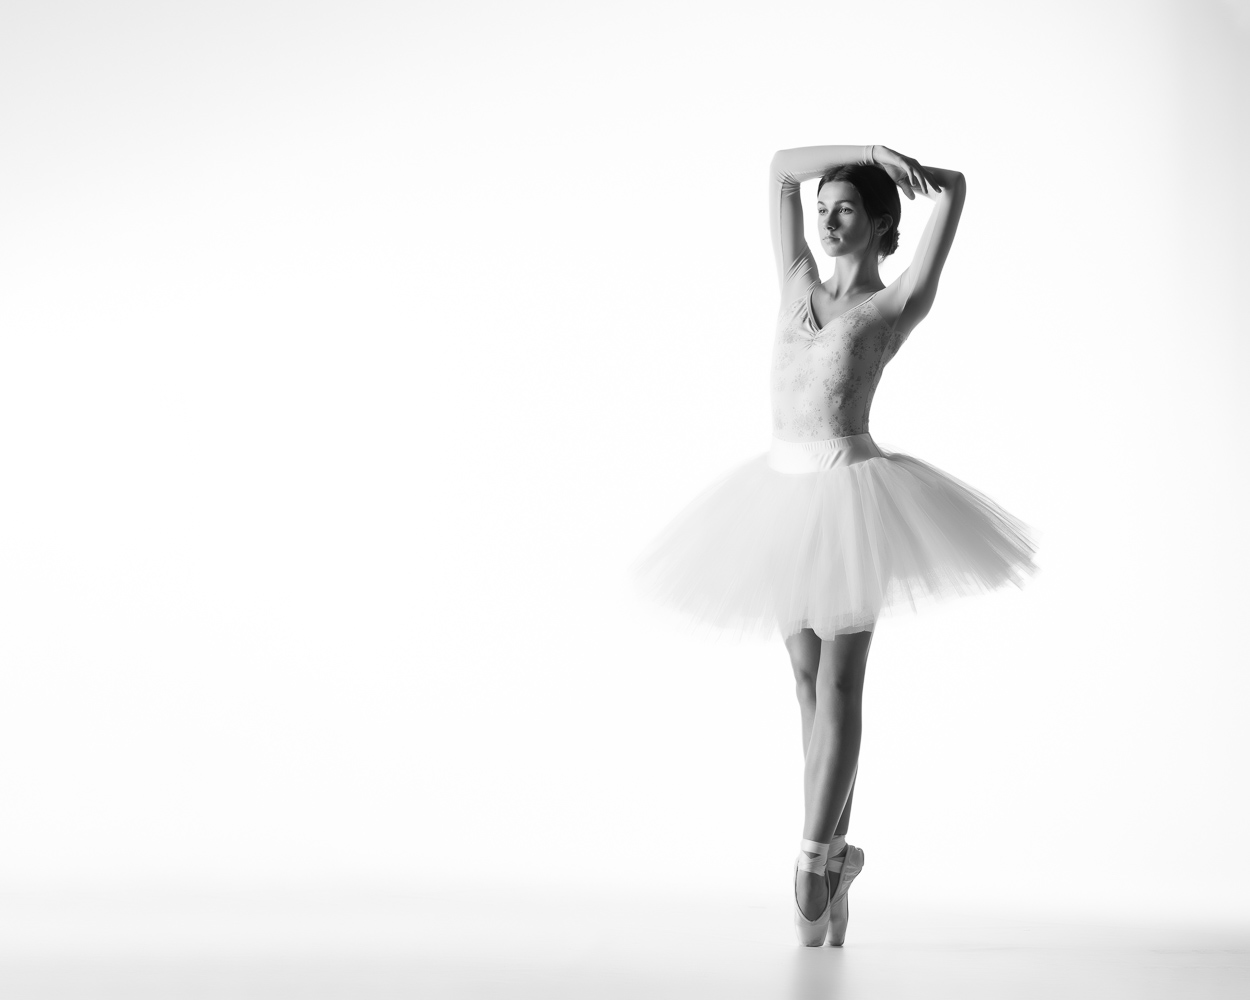 Ballerina all in white on white background in pensive fifth